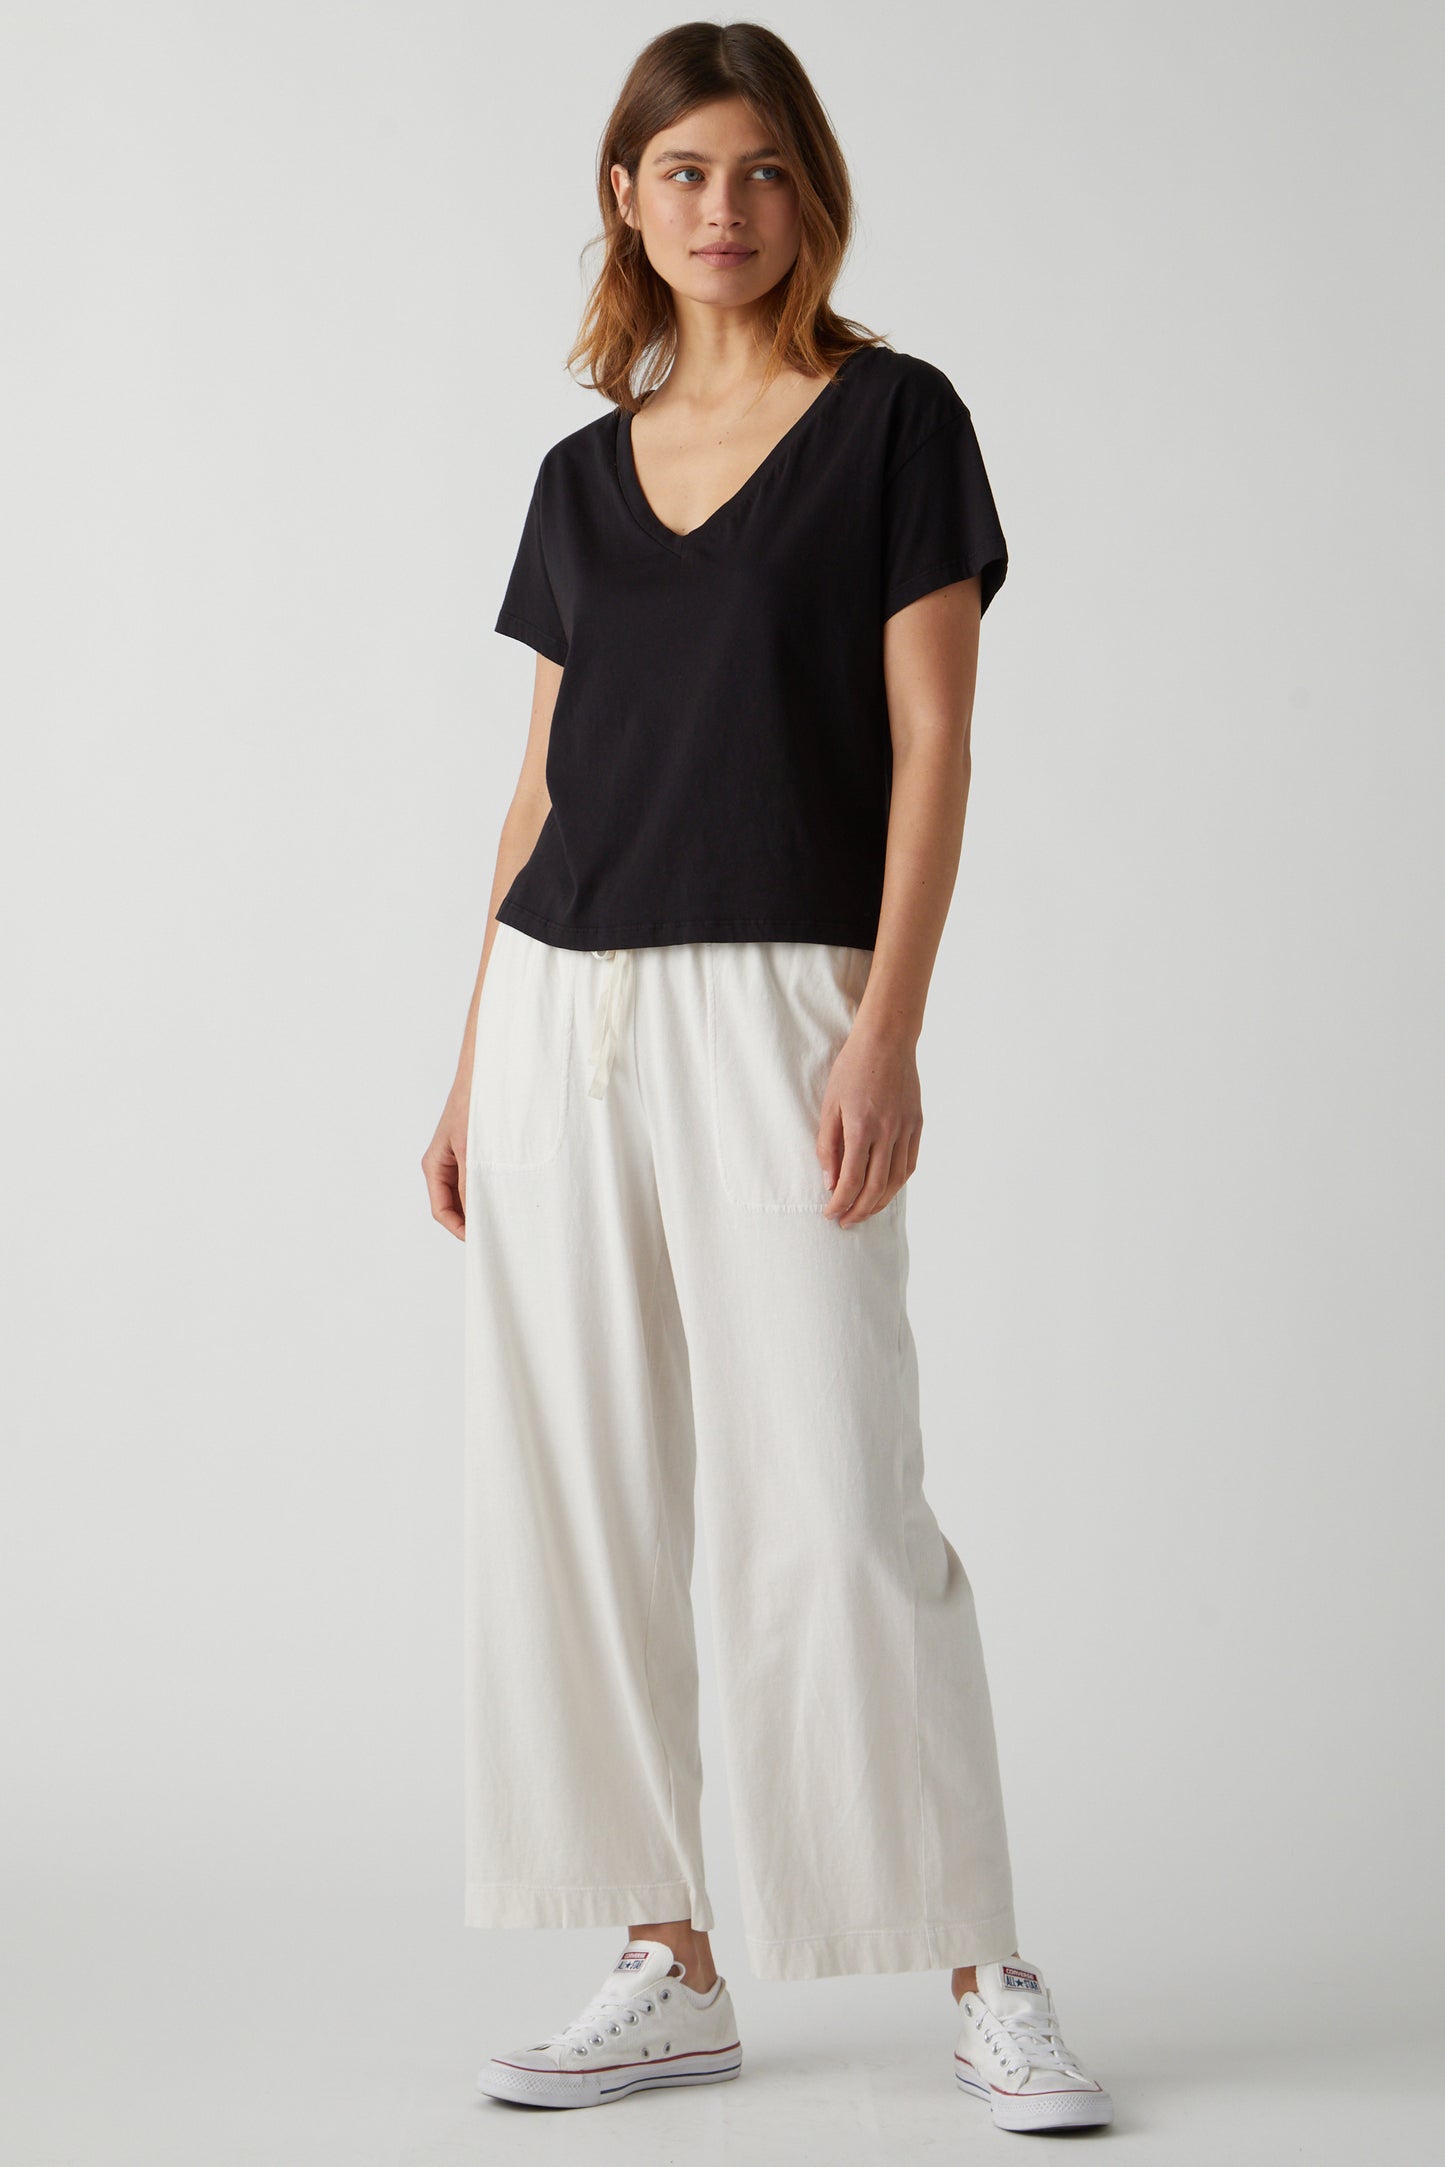 Pismo Pant in beach with Venice Tee in Black full length front-26019132178625